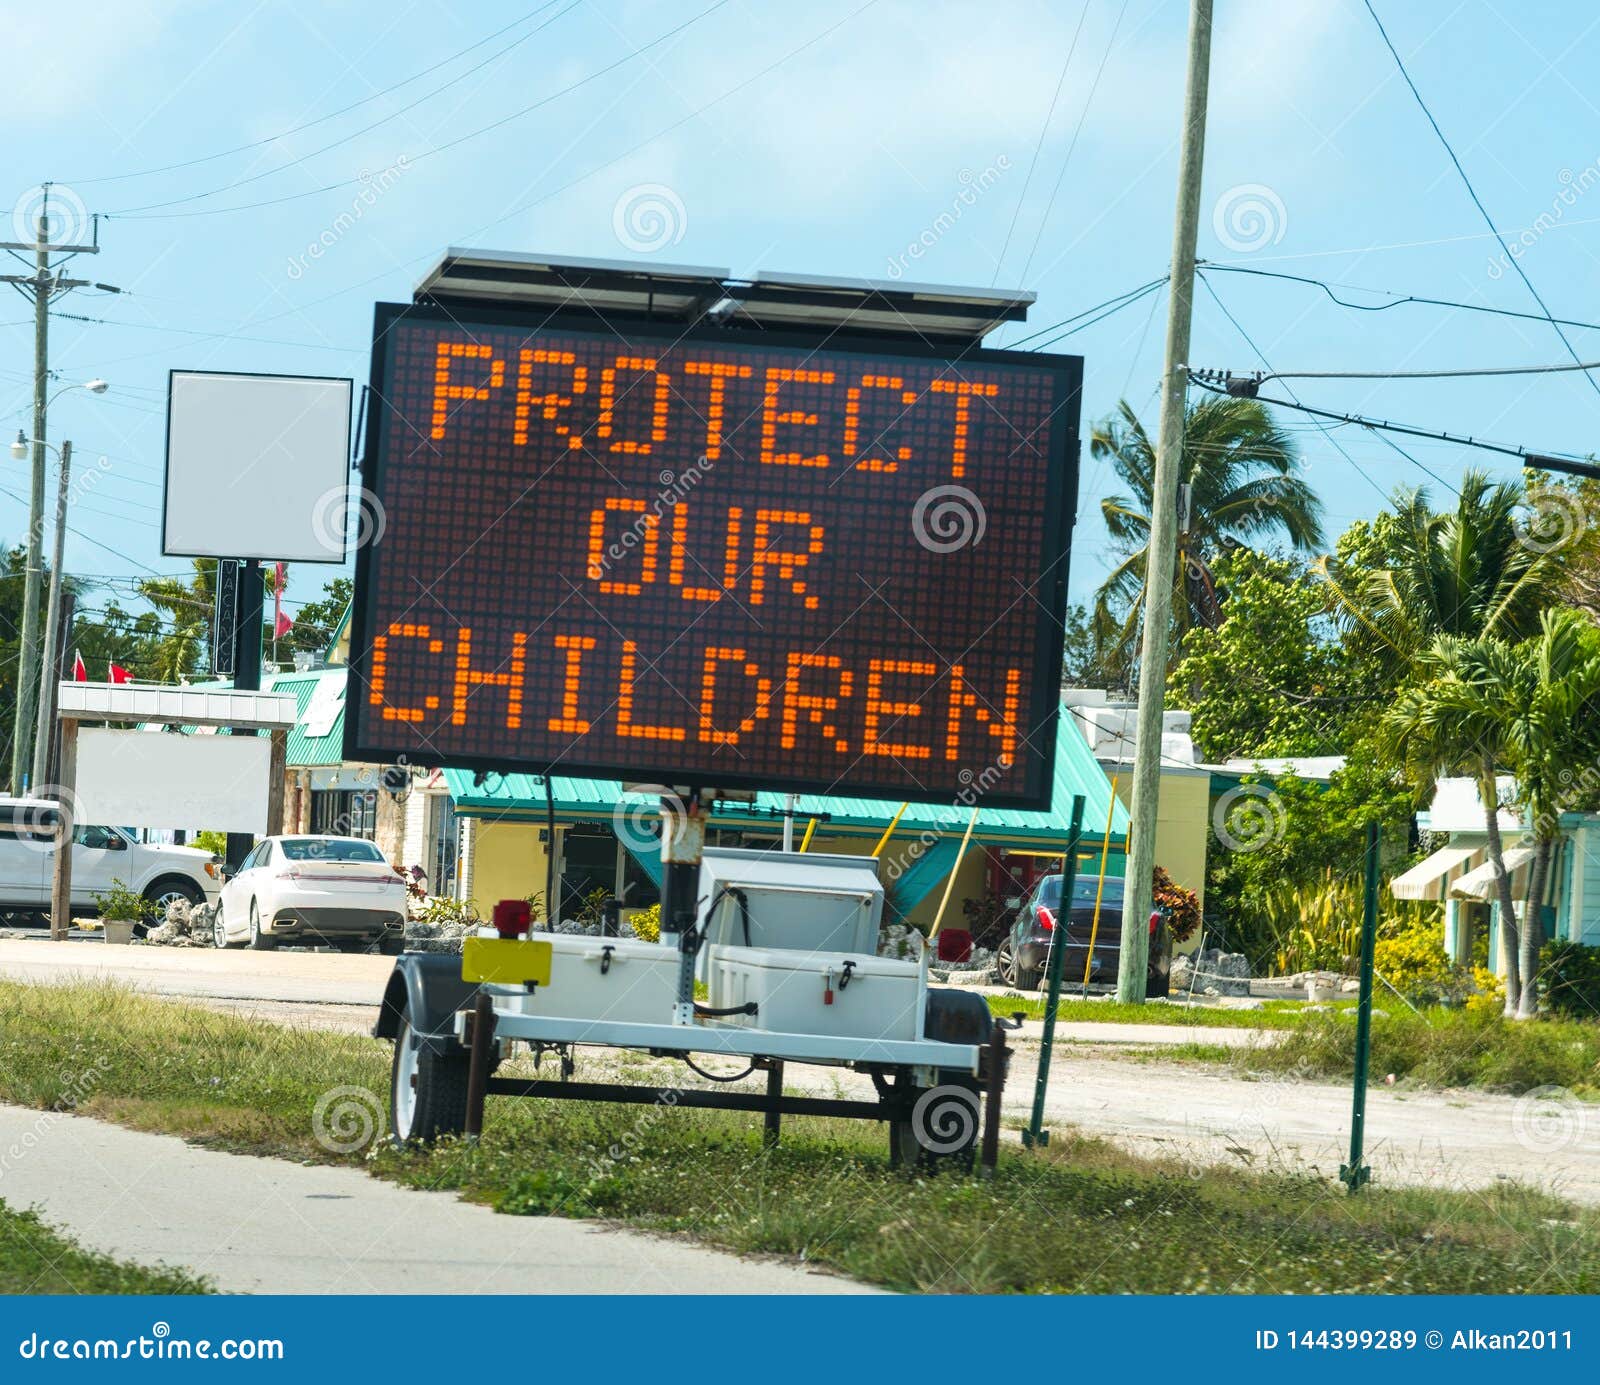 protect our children sign on the edge of the road